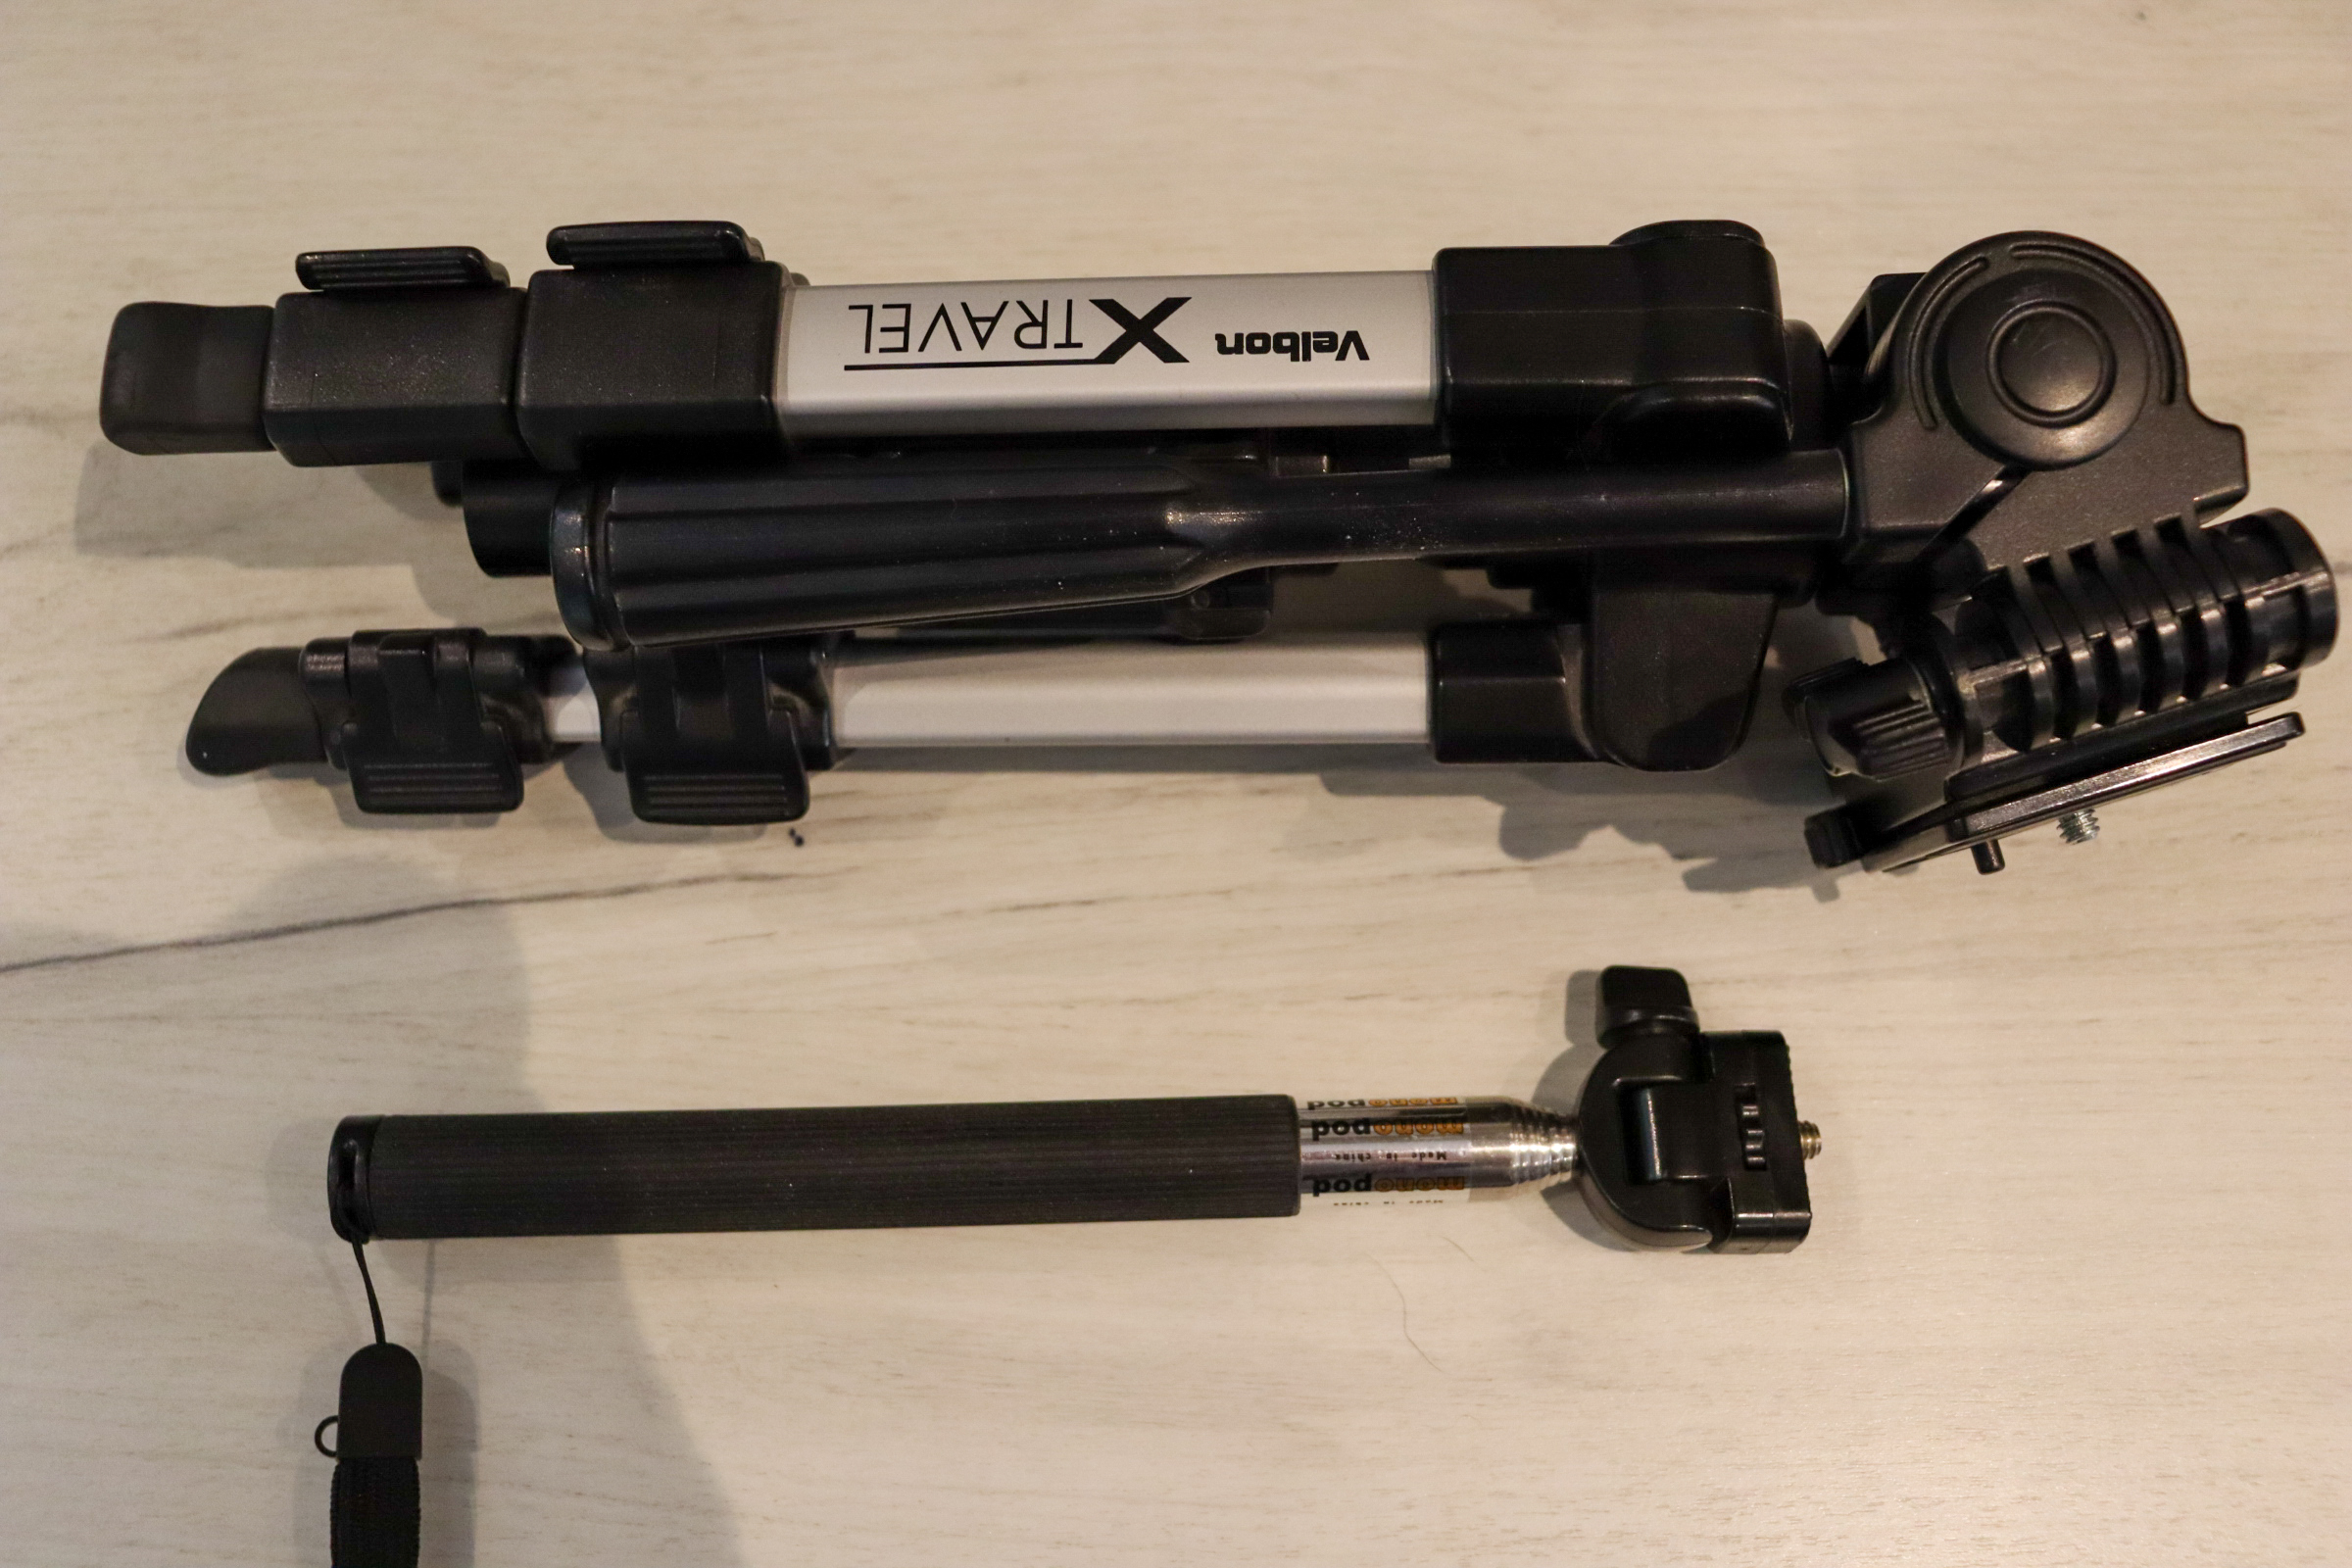 Tripod and monopod lying next to each other, showing that the monopod is much smaller to carry